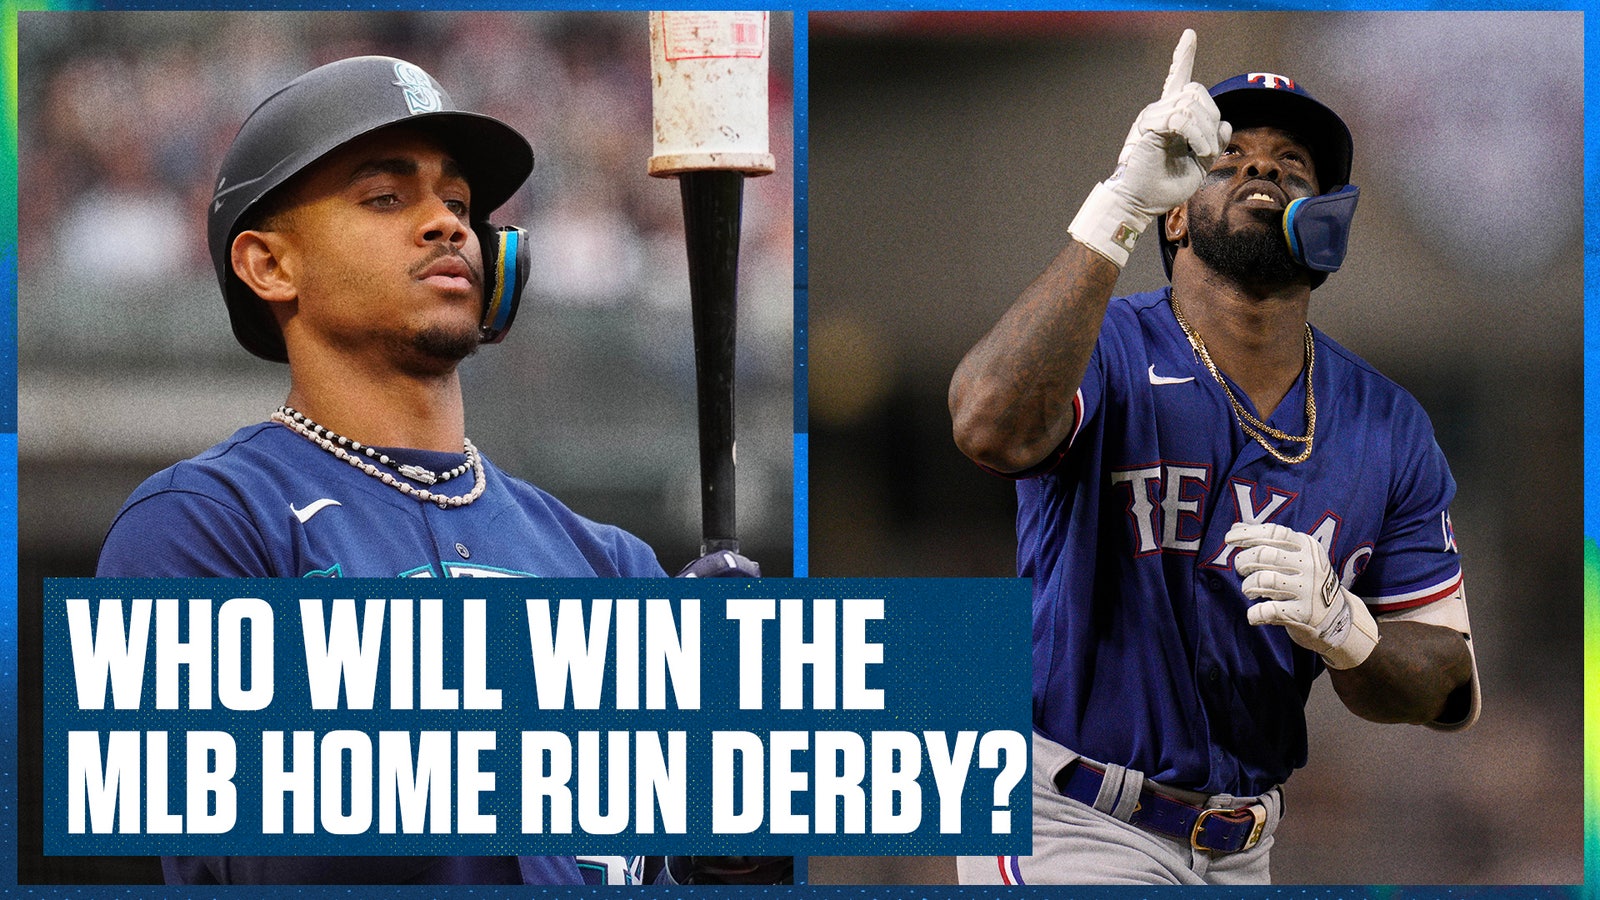 MLB Home Run Derby 2023: Picking 8 players to create a perfect bracket